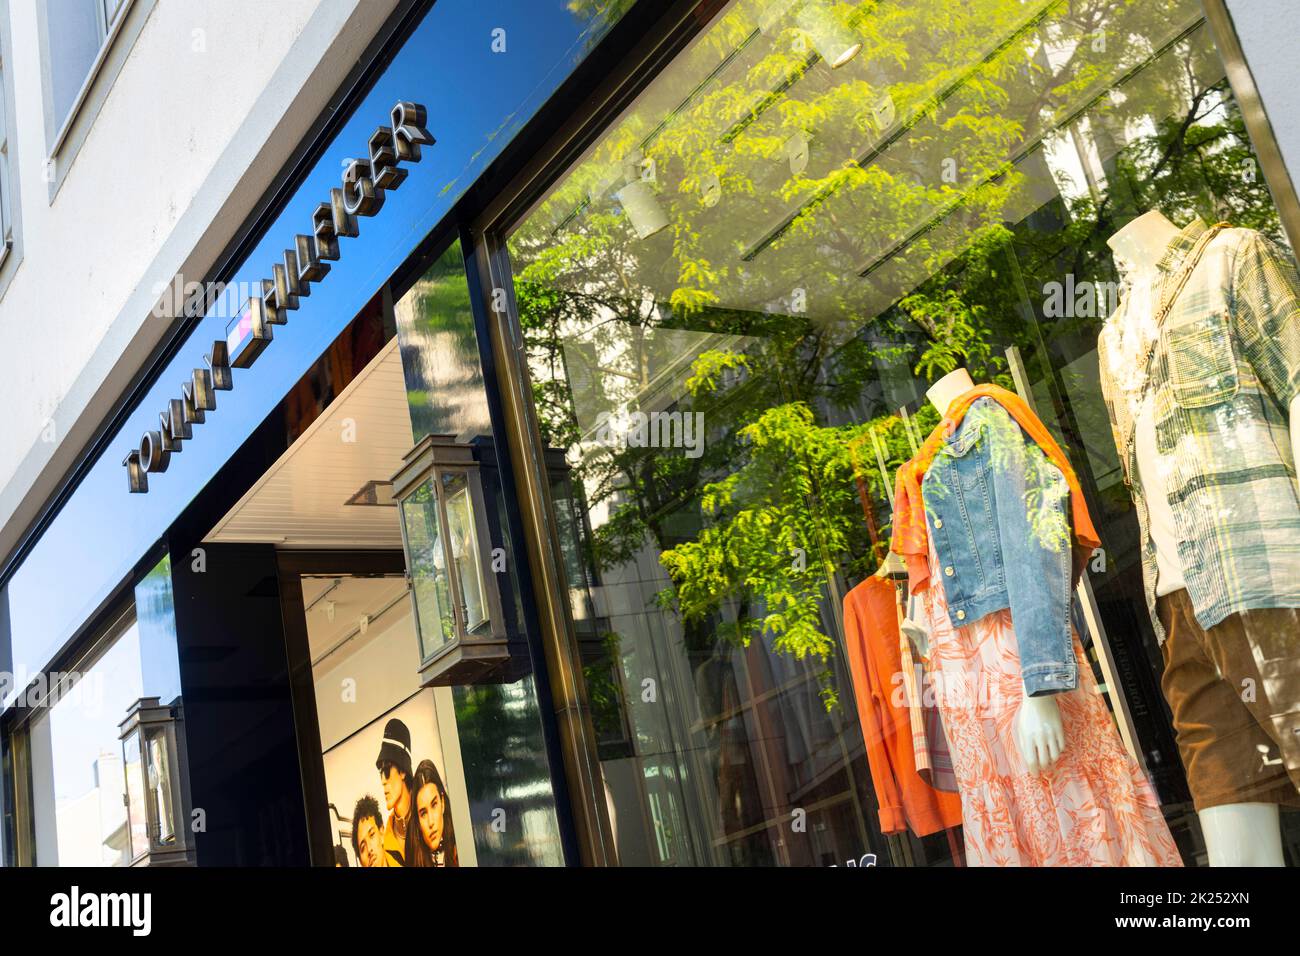 Tommy hilfiger outlet store outlet hi-res stock photography and images -  Alamy